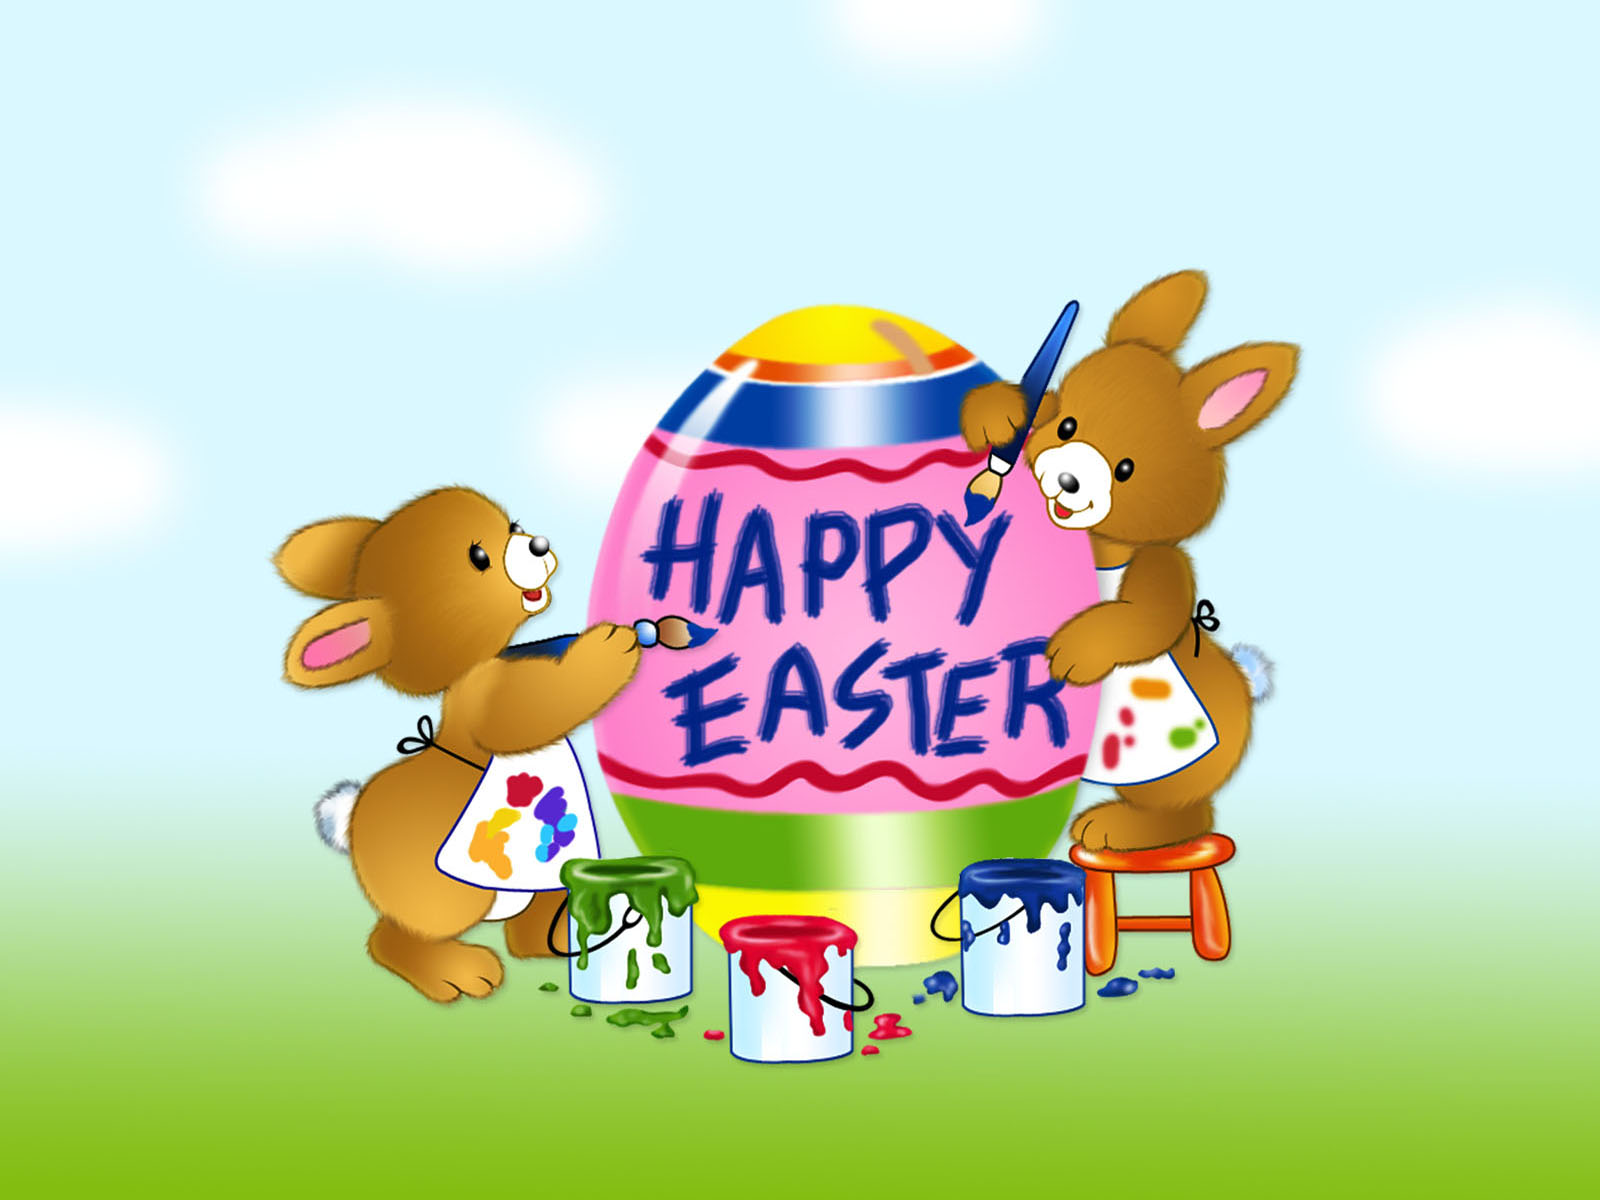 Happy Easter 2015 Pictures, Images, Wallpaper and Backgrounds